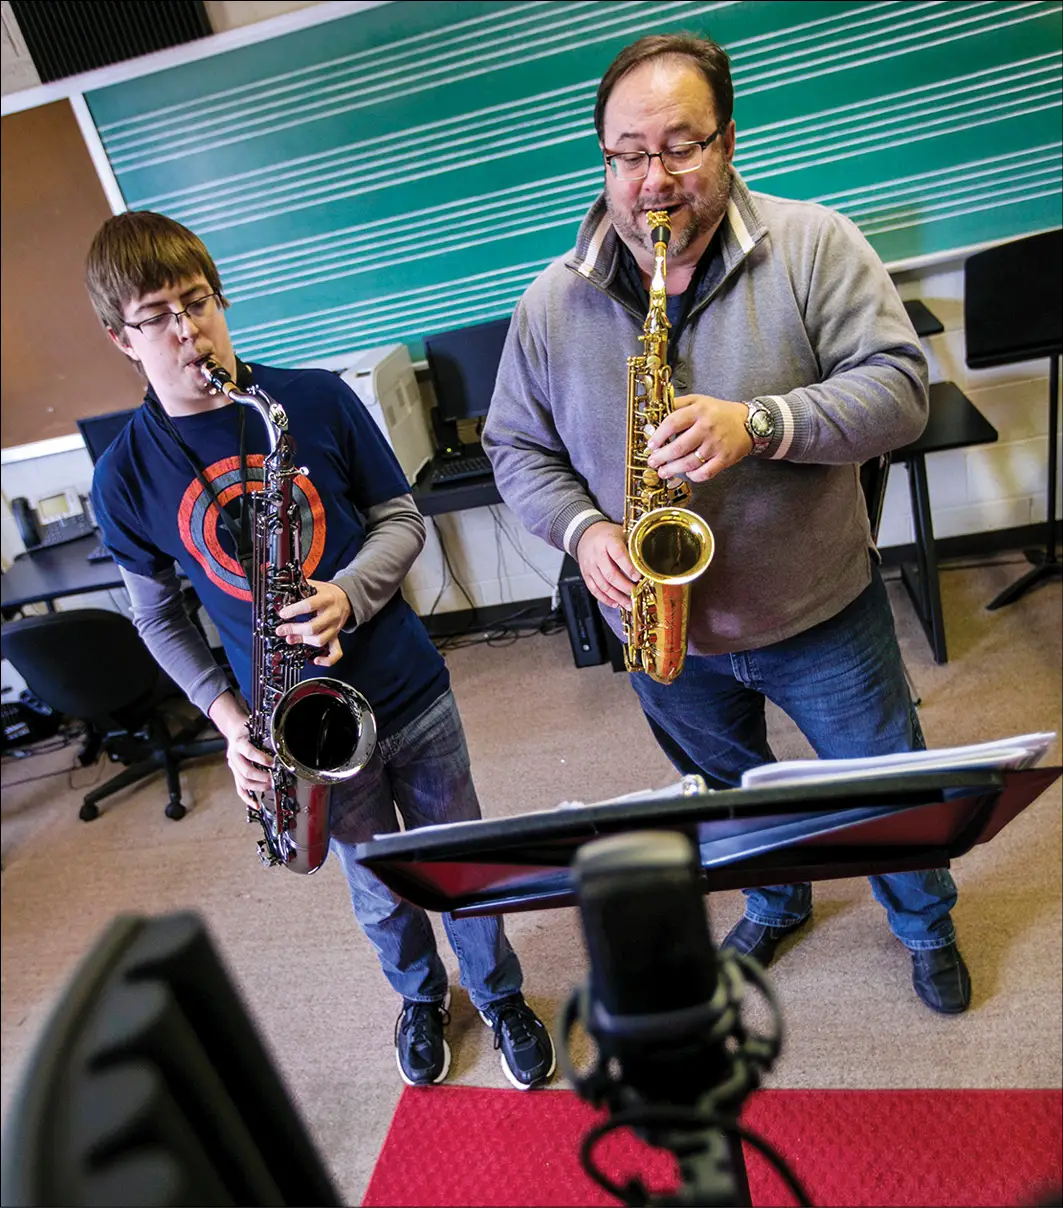 Teacher and student playing saxophone and looking at music stand